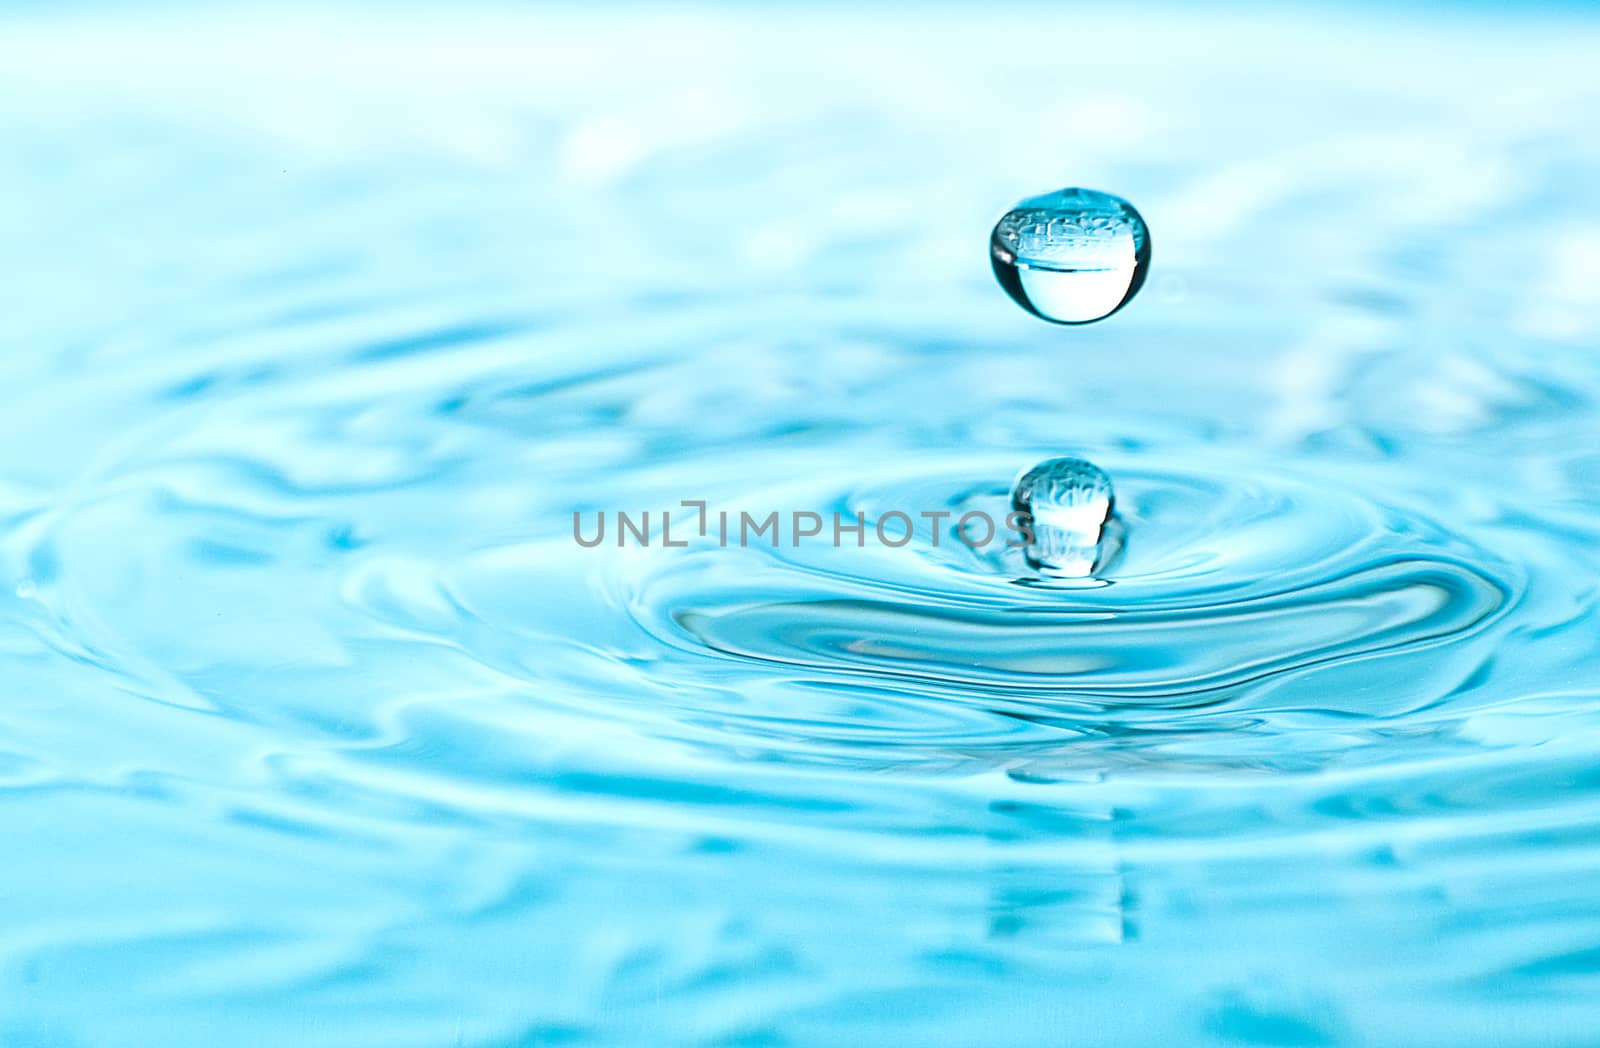 Water drop with clear reflection suspended above clear aqua colored pool